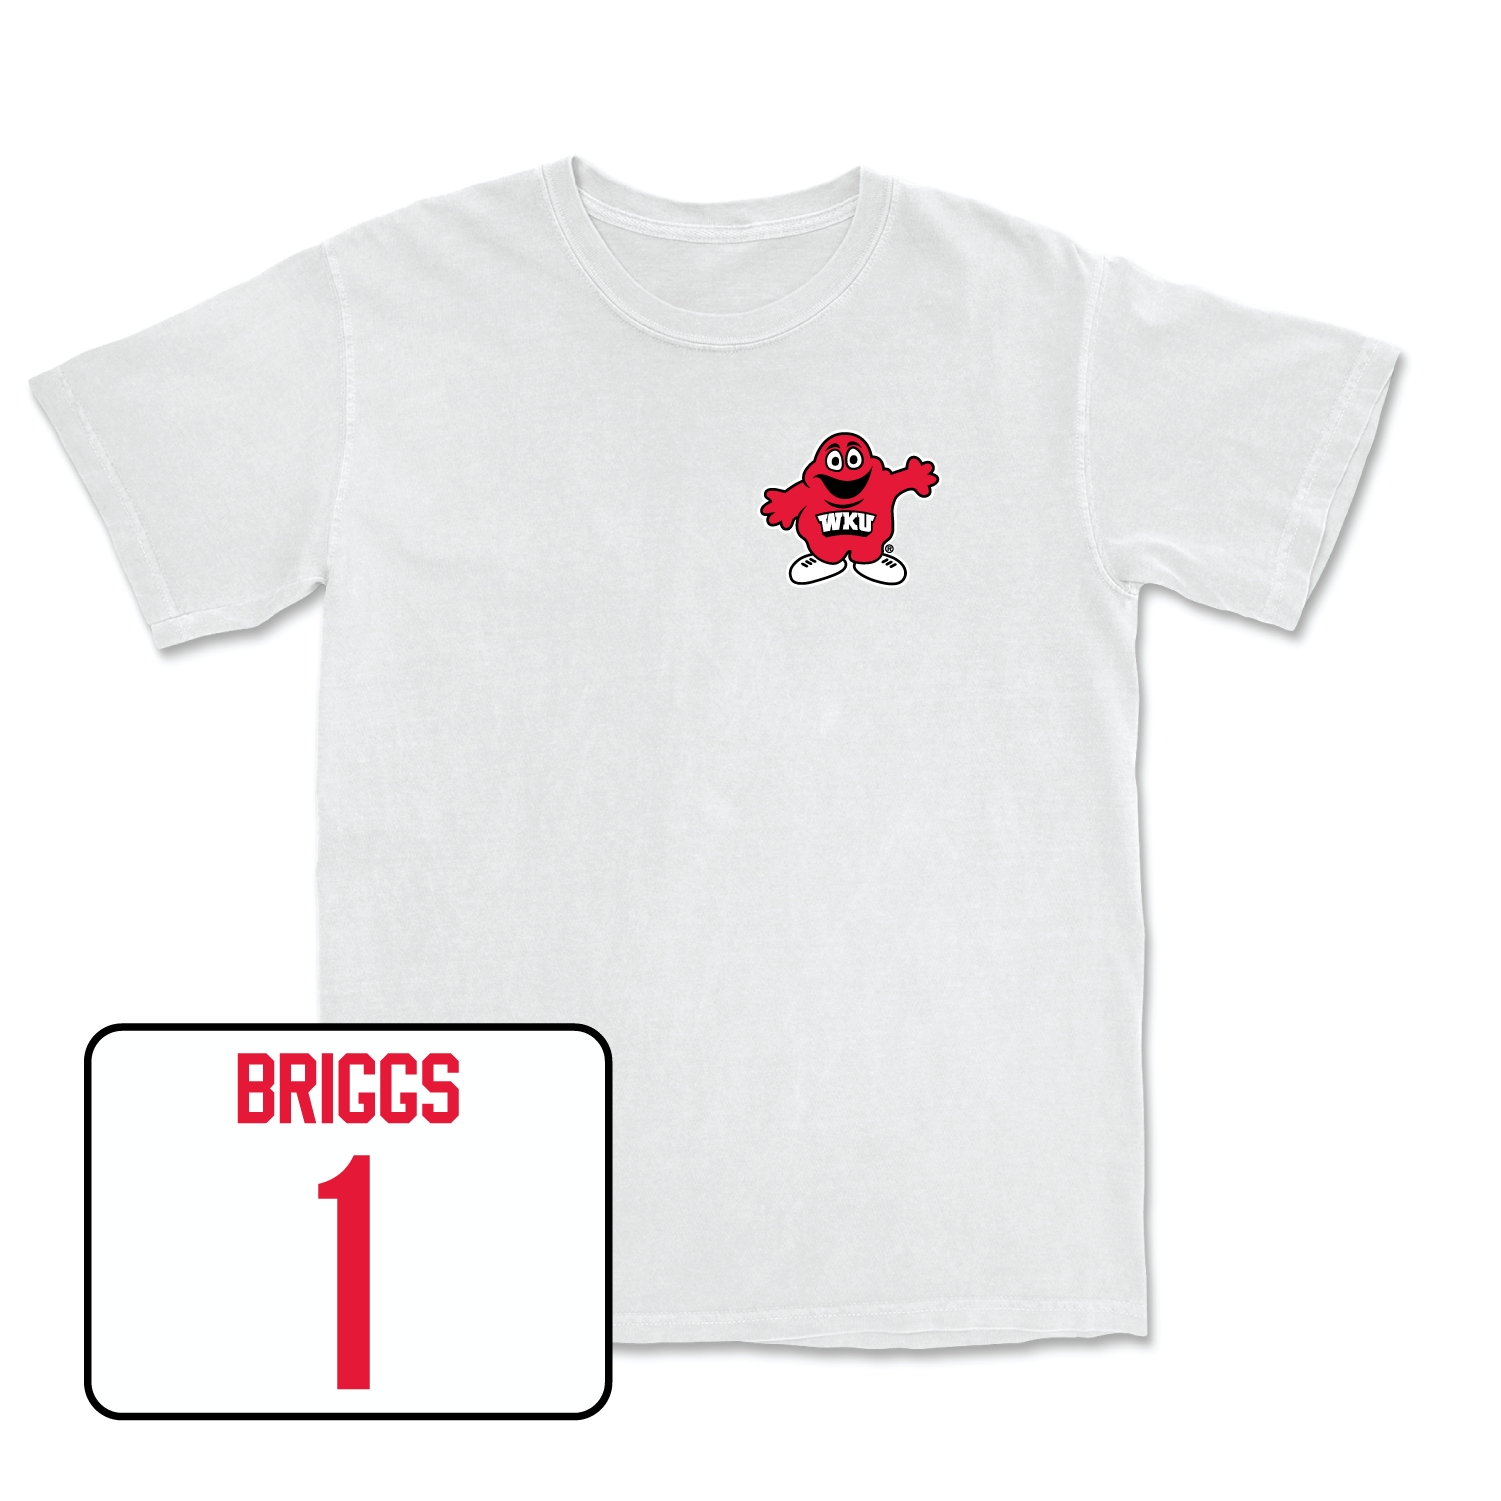 White Women's Volleyball Big Red Comfort Colors Tee Youth Large / Paige Briggs | #1